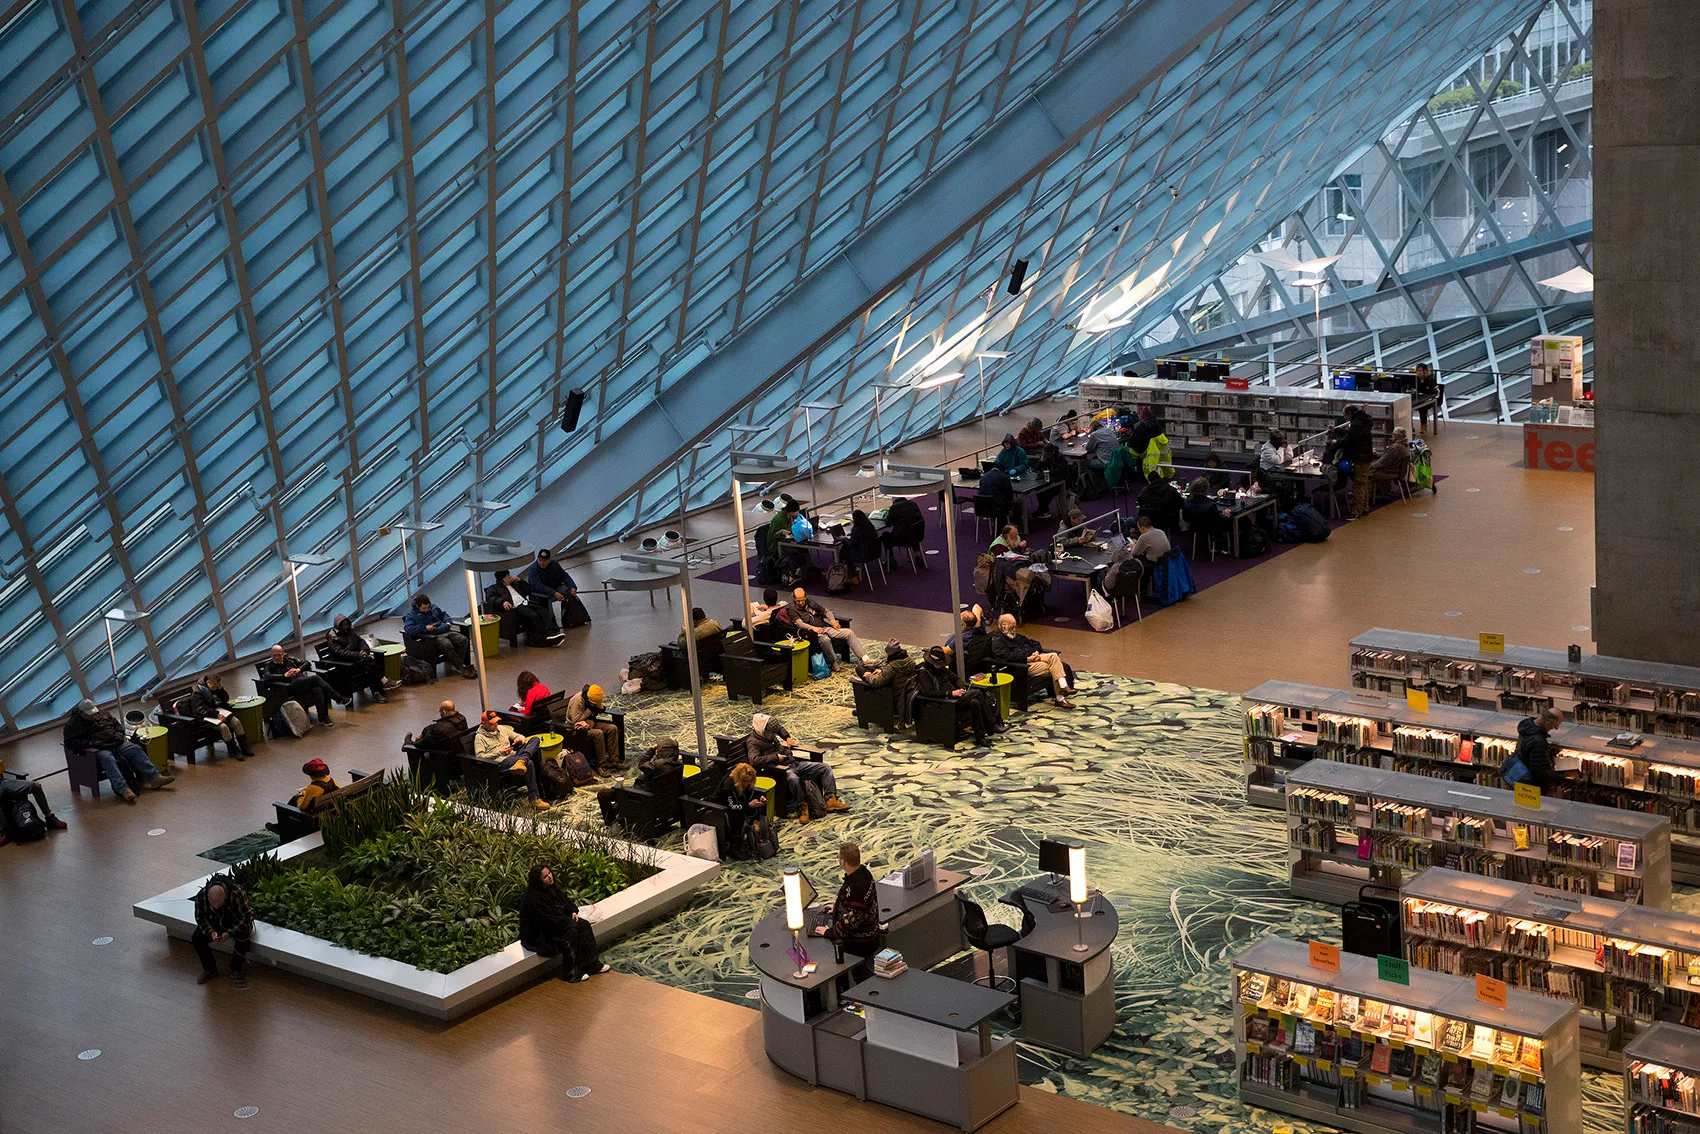 The Seattle Central Library